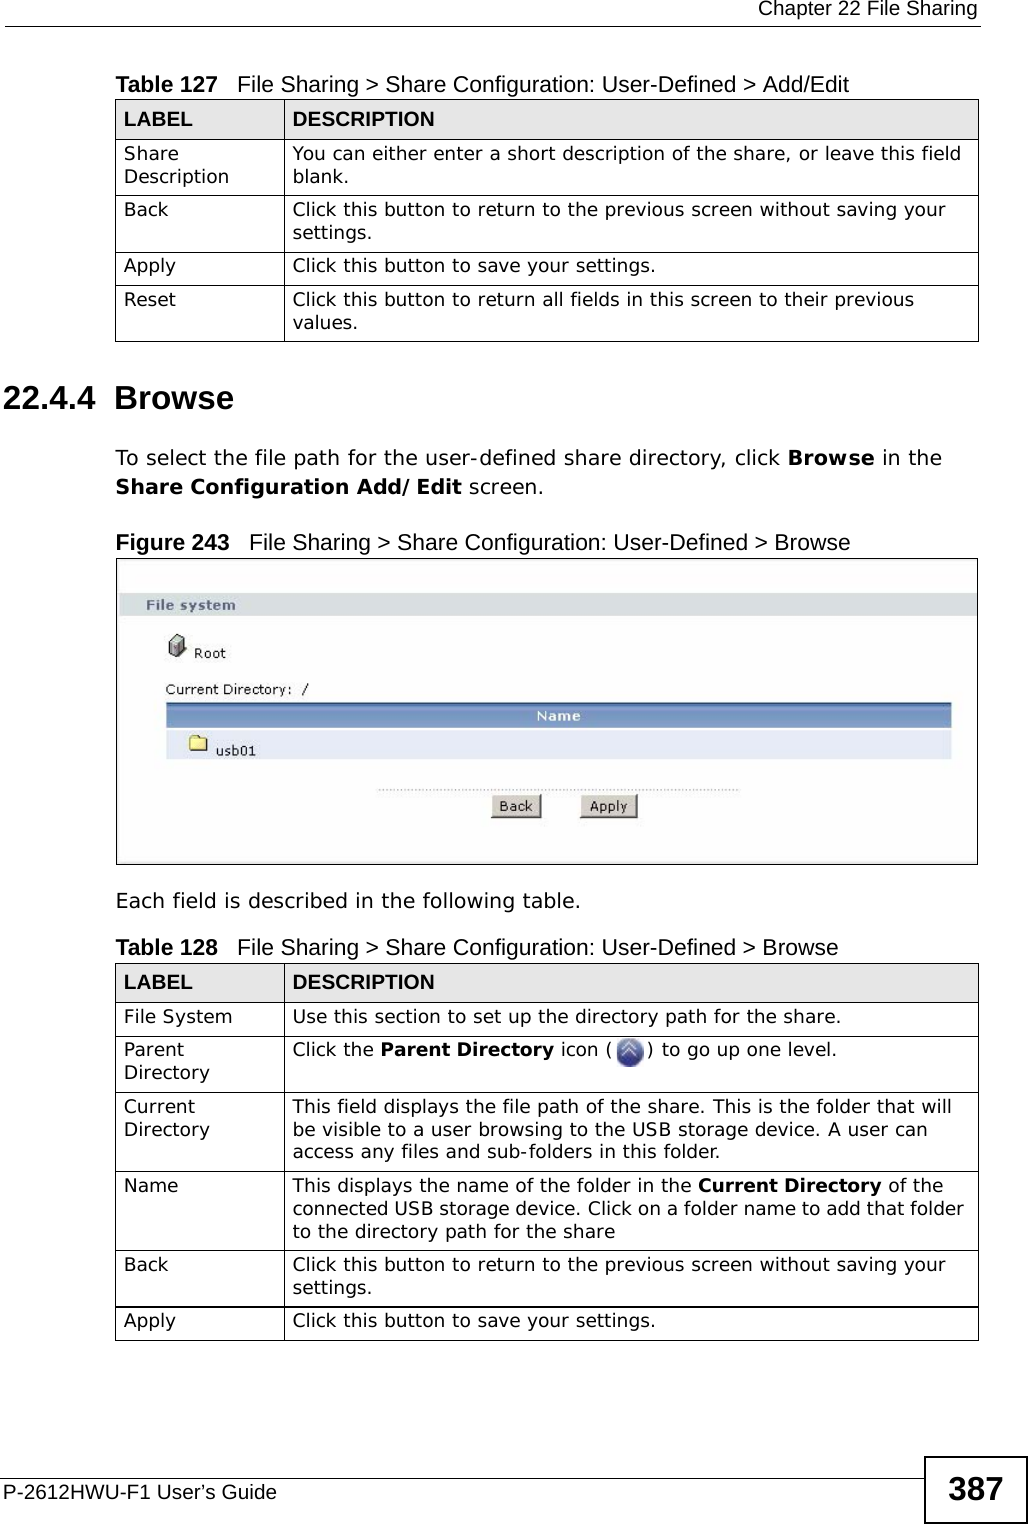  Chapter 22 File SharingP-2612HWU-F1 User’s Guide 38722.4.4  BrowseTo select the file path for the user-defined share directory, click Browse in the Share Configuration Add/Edit screen.Figure 243   File Sharing &gt; Share Configuration: User-Defined &gt; BrowseEach field is described in the following table.Share Description  You can either enter a short description of the share, or leave this field blank. Back Click this button to return to the previous screen without saving your settings. Apply Click this button to save your settings. Reset Click this button to return all fields in this screen to their previous values. Table 127   File Sharing &gt; Share Configuration: User-Defined &gt; Add/EditLABEL DESCRIPTIONTable 128   File Sharing &gt; Share Configuration: User-Defined &gt; BrowseLABEL DESCRIPTIONFile System  Use this section to set up the directory path for the share. Parent Directory Click the Parent Directory icon ( ) to go up one level.Current Directory This field displays the file path of the share. This is the folder that will be visible to a user browsing to the USB storage device. A user can access any files and sub-folders in this folder.Name This displays the name of the folder in the Current Directory of the connected USB storage device. Click on a folder name to add that folder to the directory path for the shareBack Click this button to return to the previous screen without saving your settings. Apply Click this button to save your settings. 